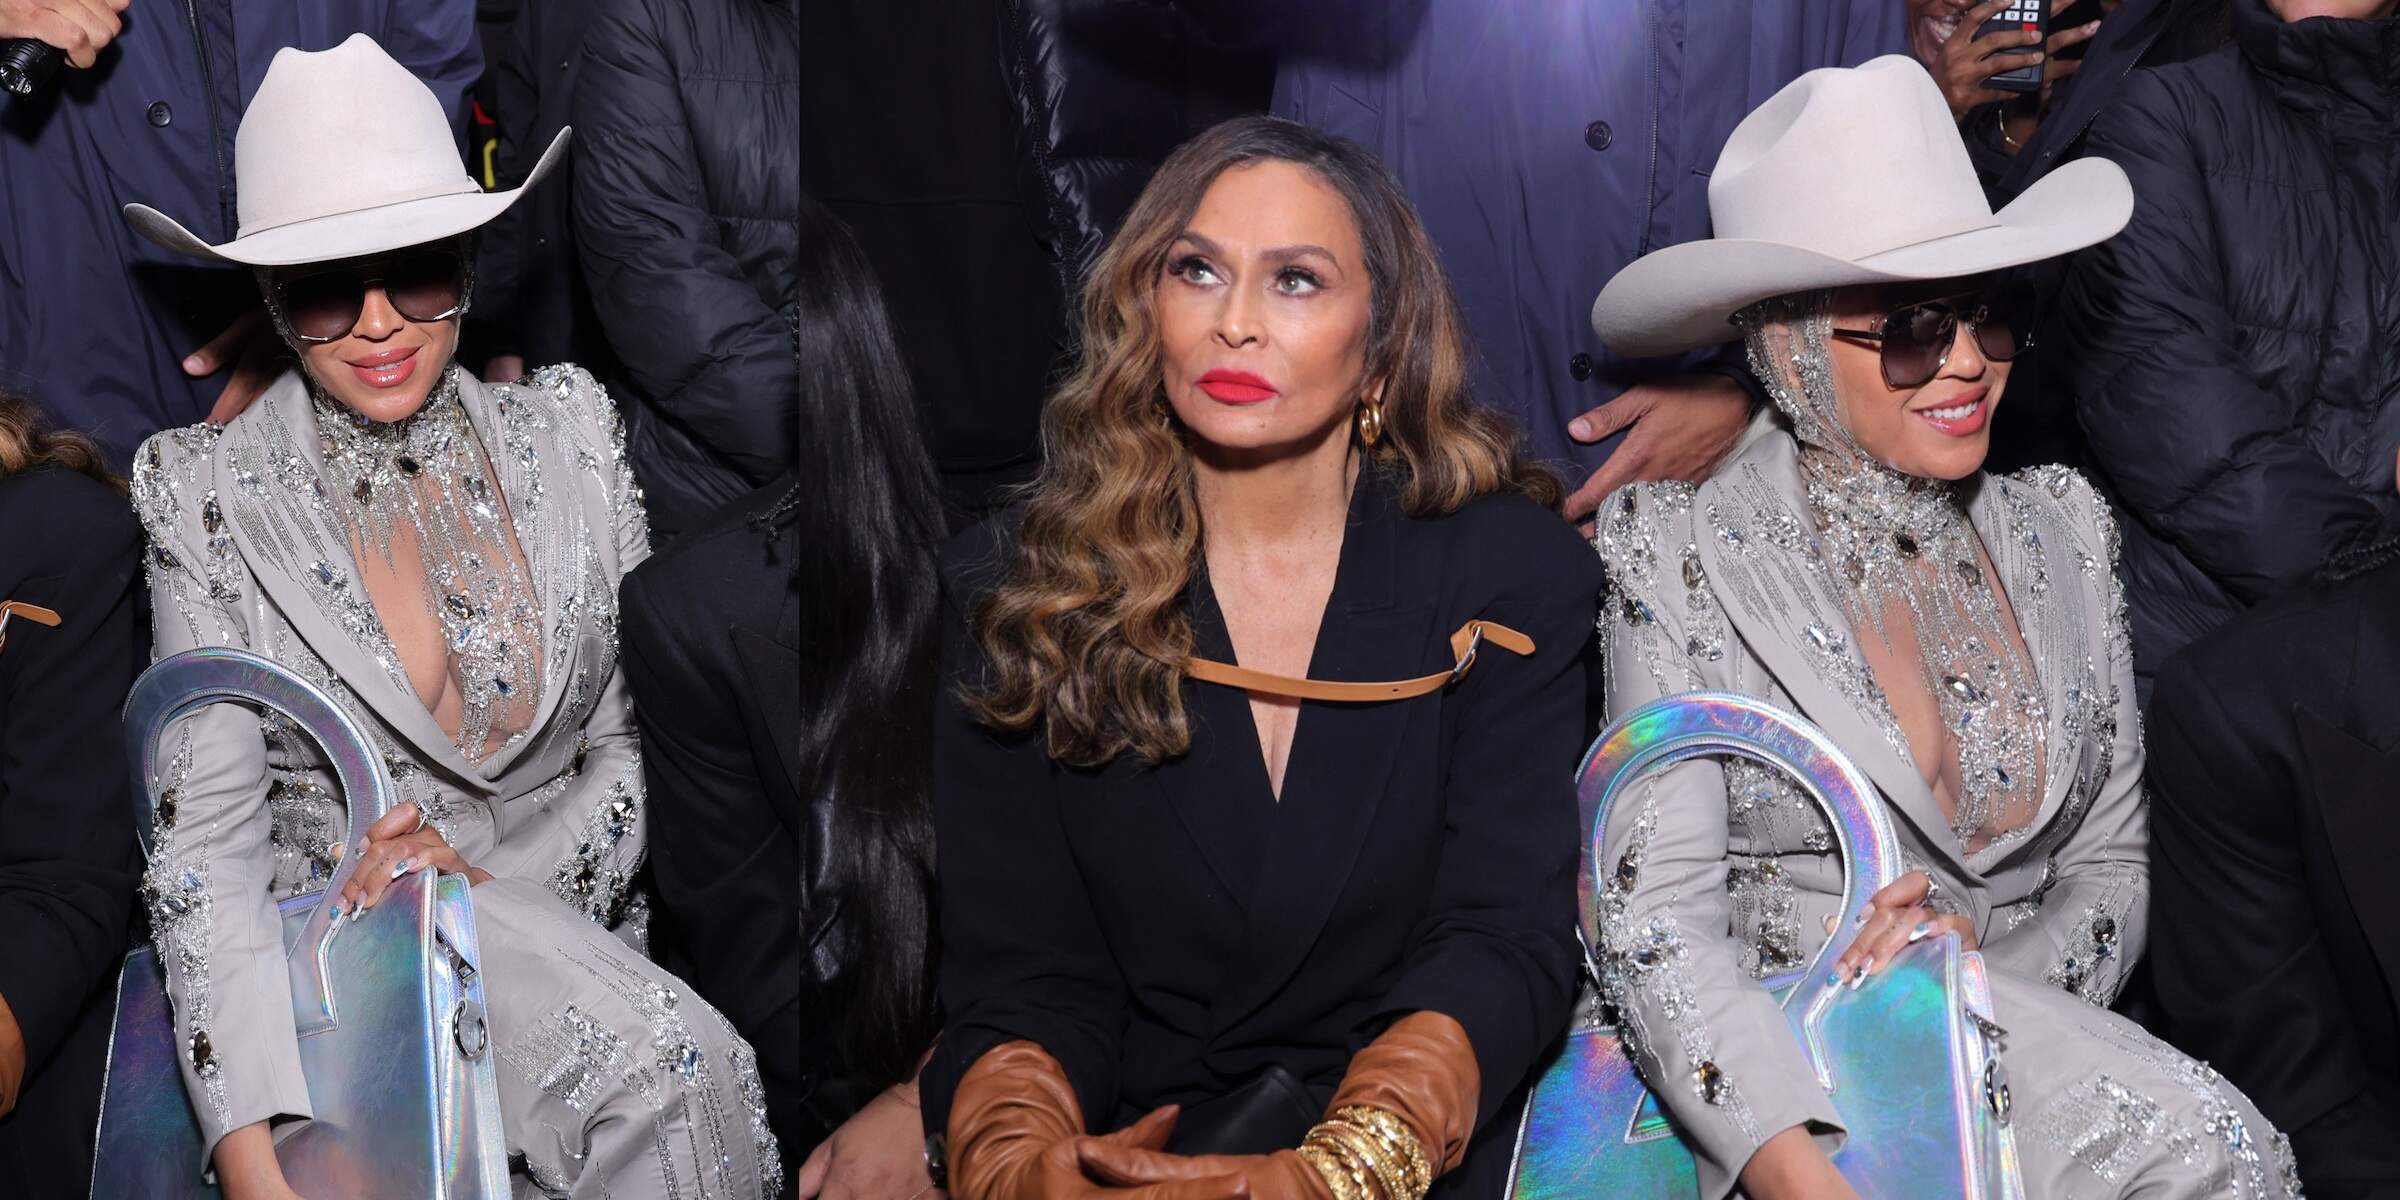 Stars Wearing Cowboy Hats, Beyoncé Going Country Sets Trend